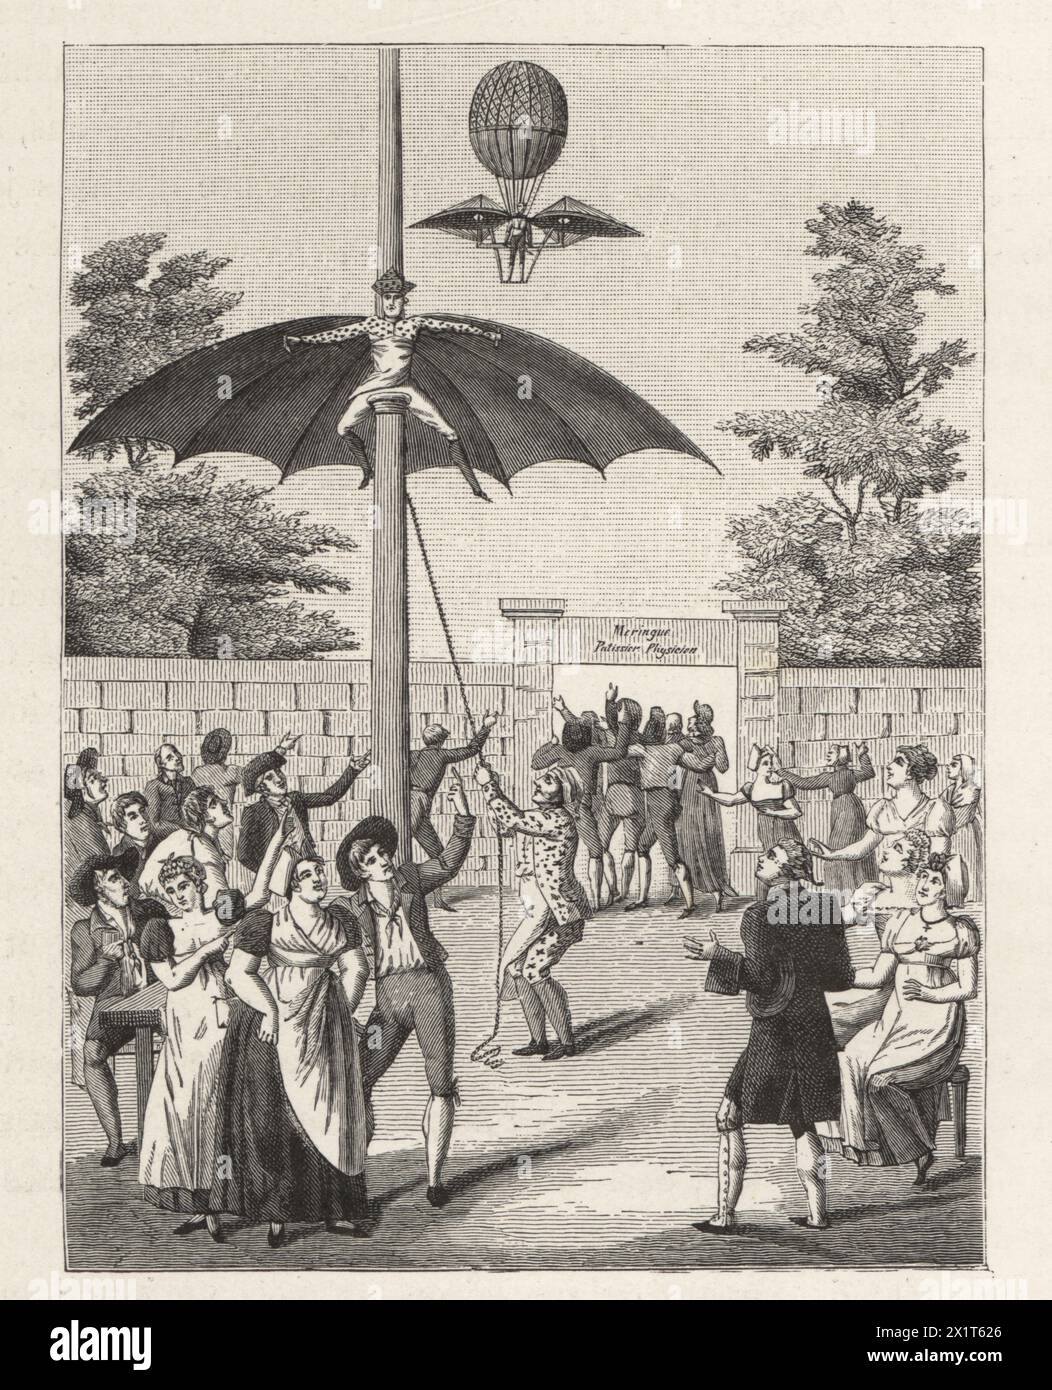 Comic actor Brunet (Jean-Joseph Mira) playing the aeronaut Deghen in Vol-au-vent, le Patissier d'Asnieres at the Théâtre des Variétés. Jacques Deghen and his winged balloon flying in the background. After an anonymous engraving. Illustration from Paul Lacroix's Directoire, Consulat et Empire, (Directory, Consulate and Empire), Paris, 1884. Stock Photo